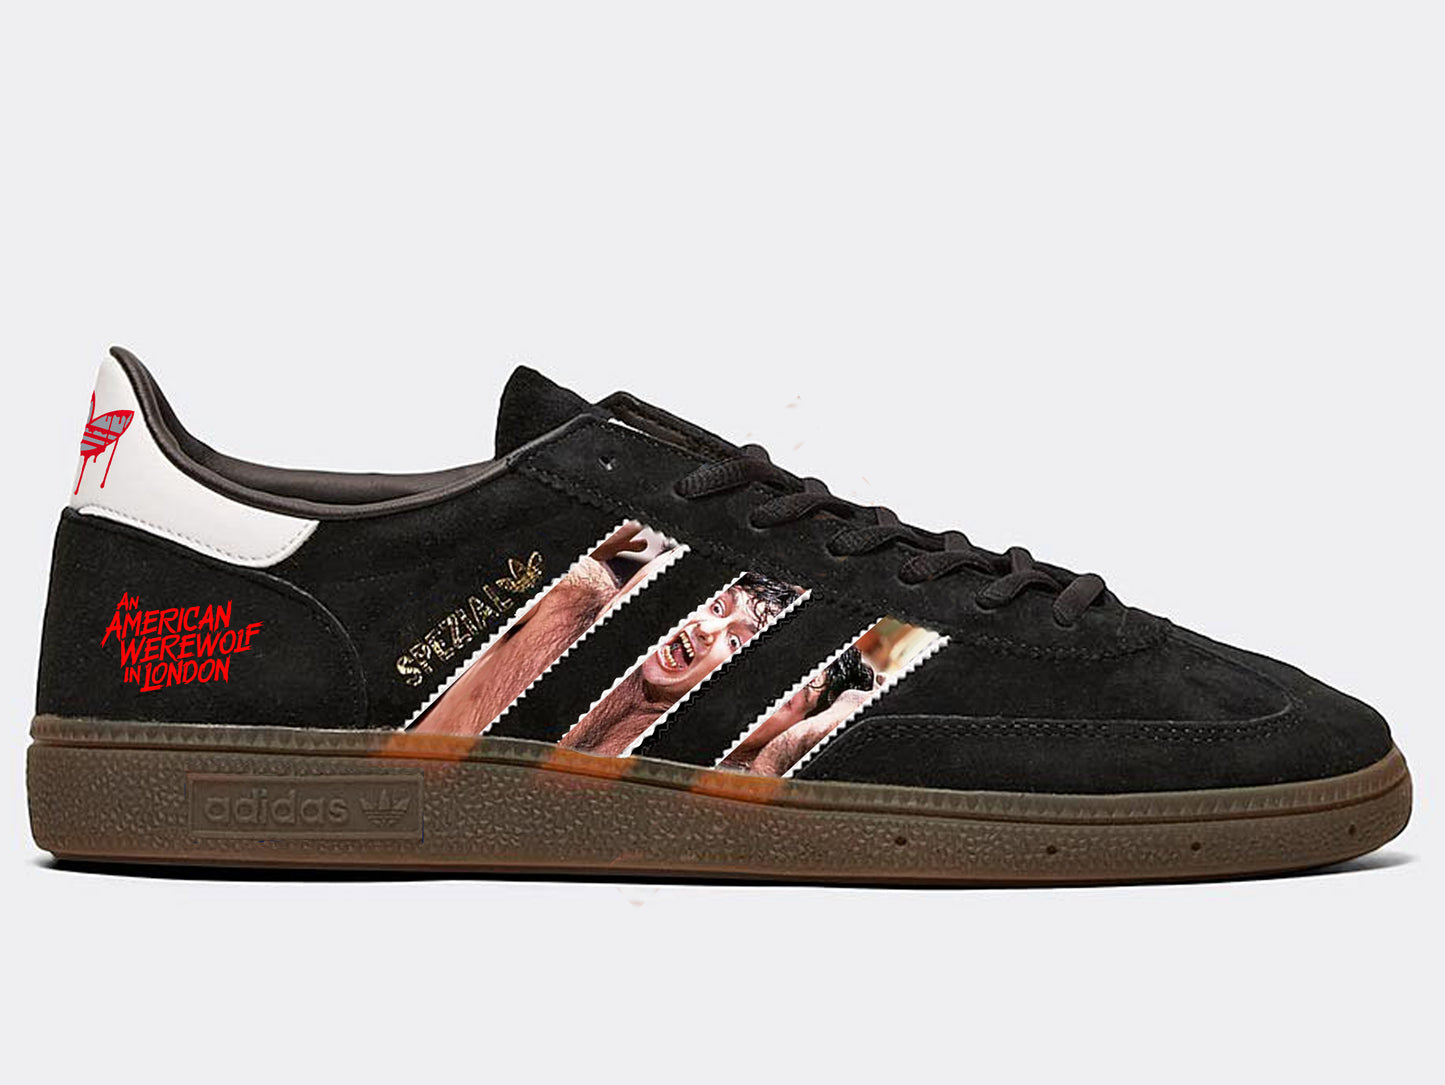 Limited edition An American Werewolf in London Black Adidas Spezial trainers / sneakers